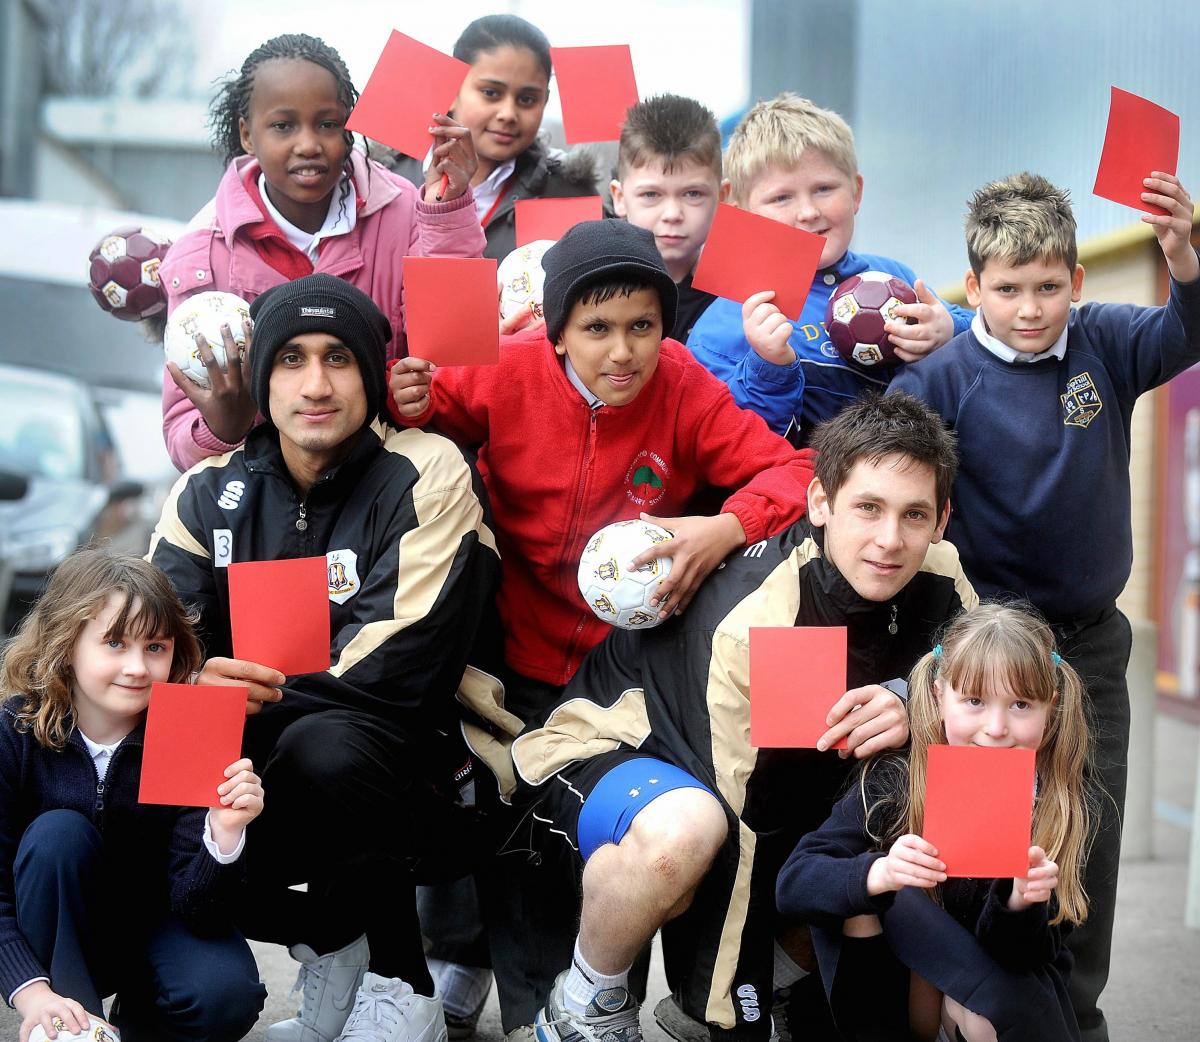 Bradford City footballers took time out from training to promote an anti-racism message to school children at Valley Parade. 